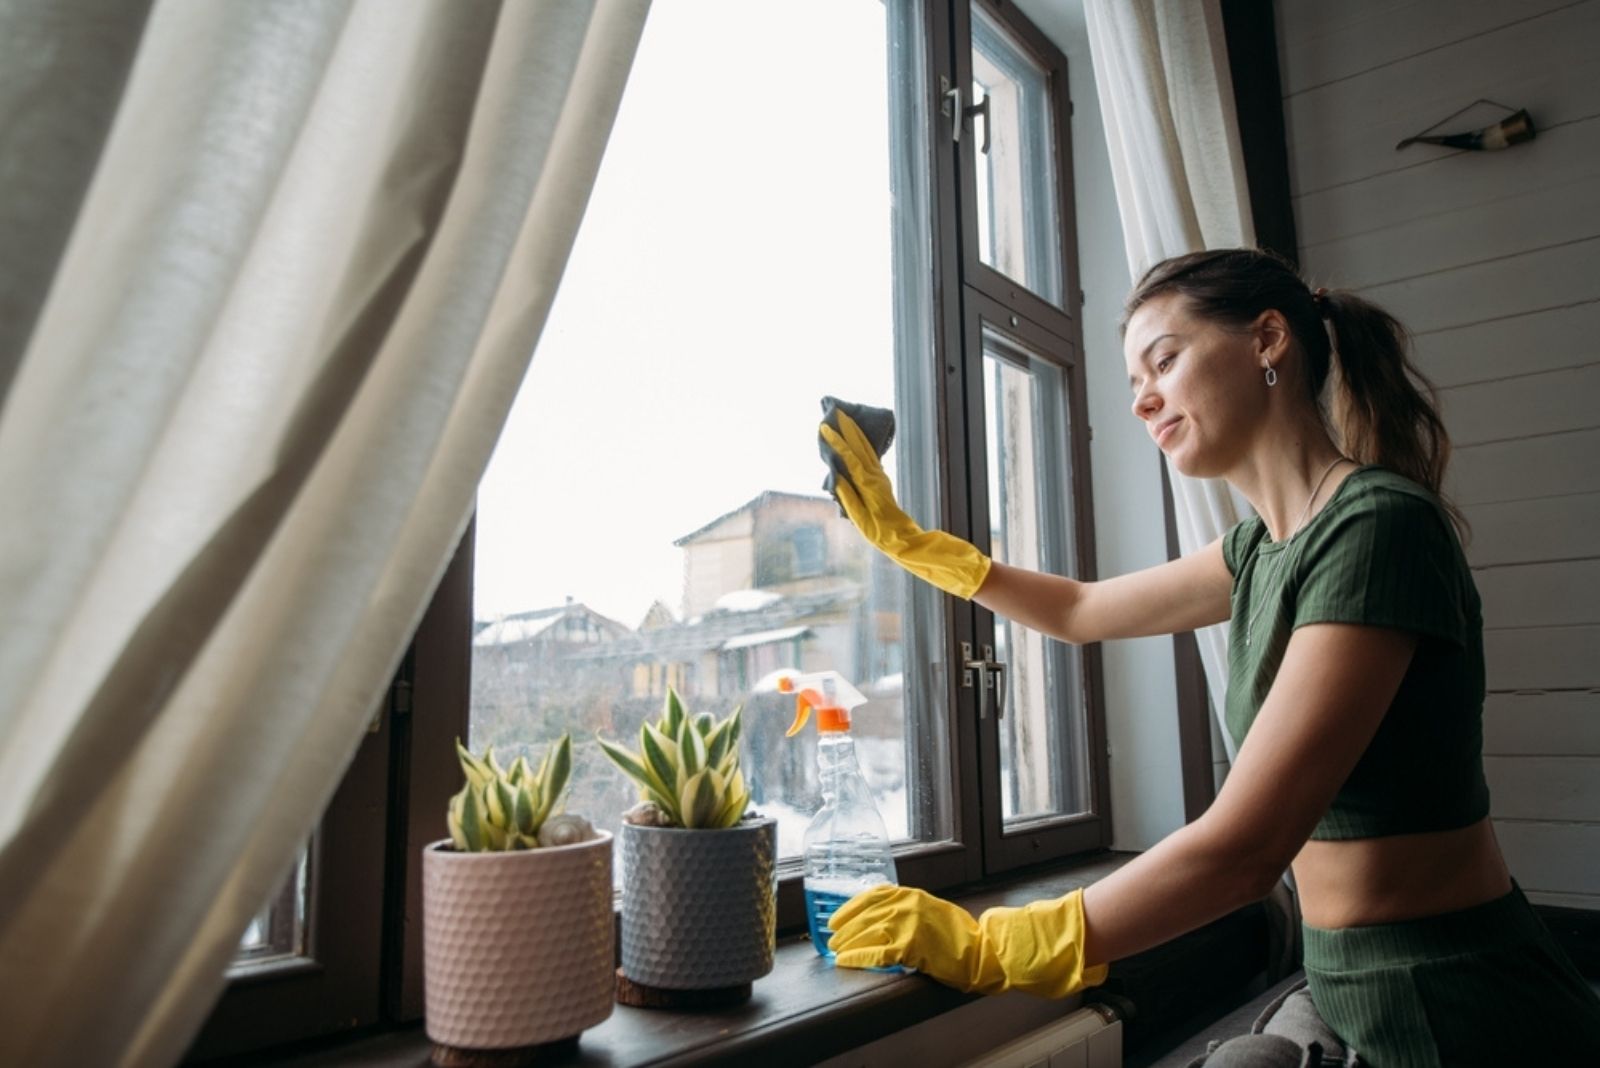 the woman cleans the windows